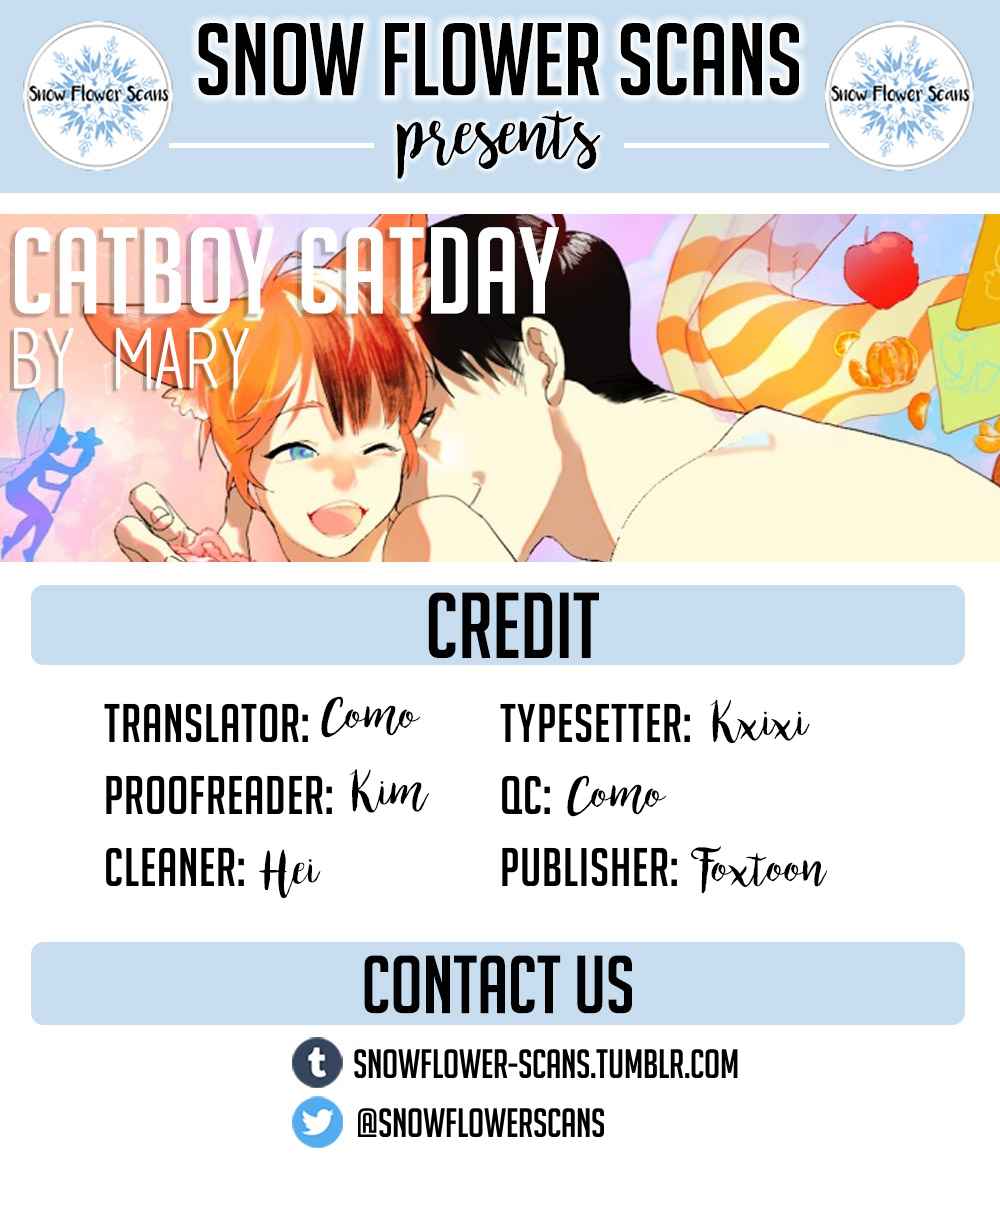 Catboy Catday Ch. 42 Is It True?